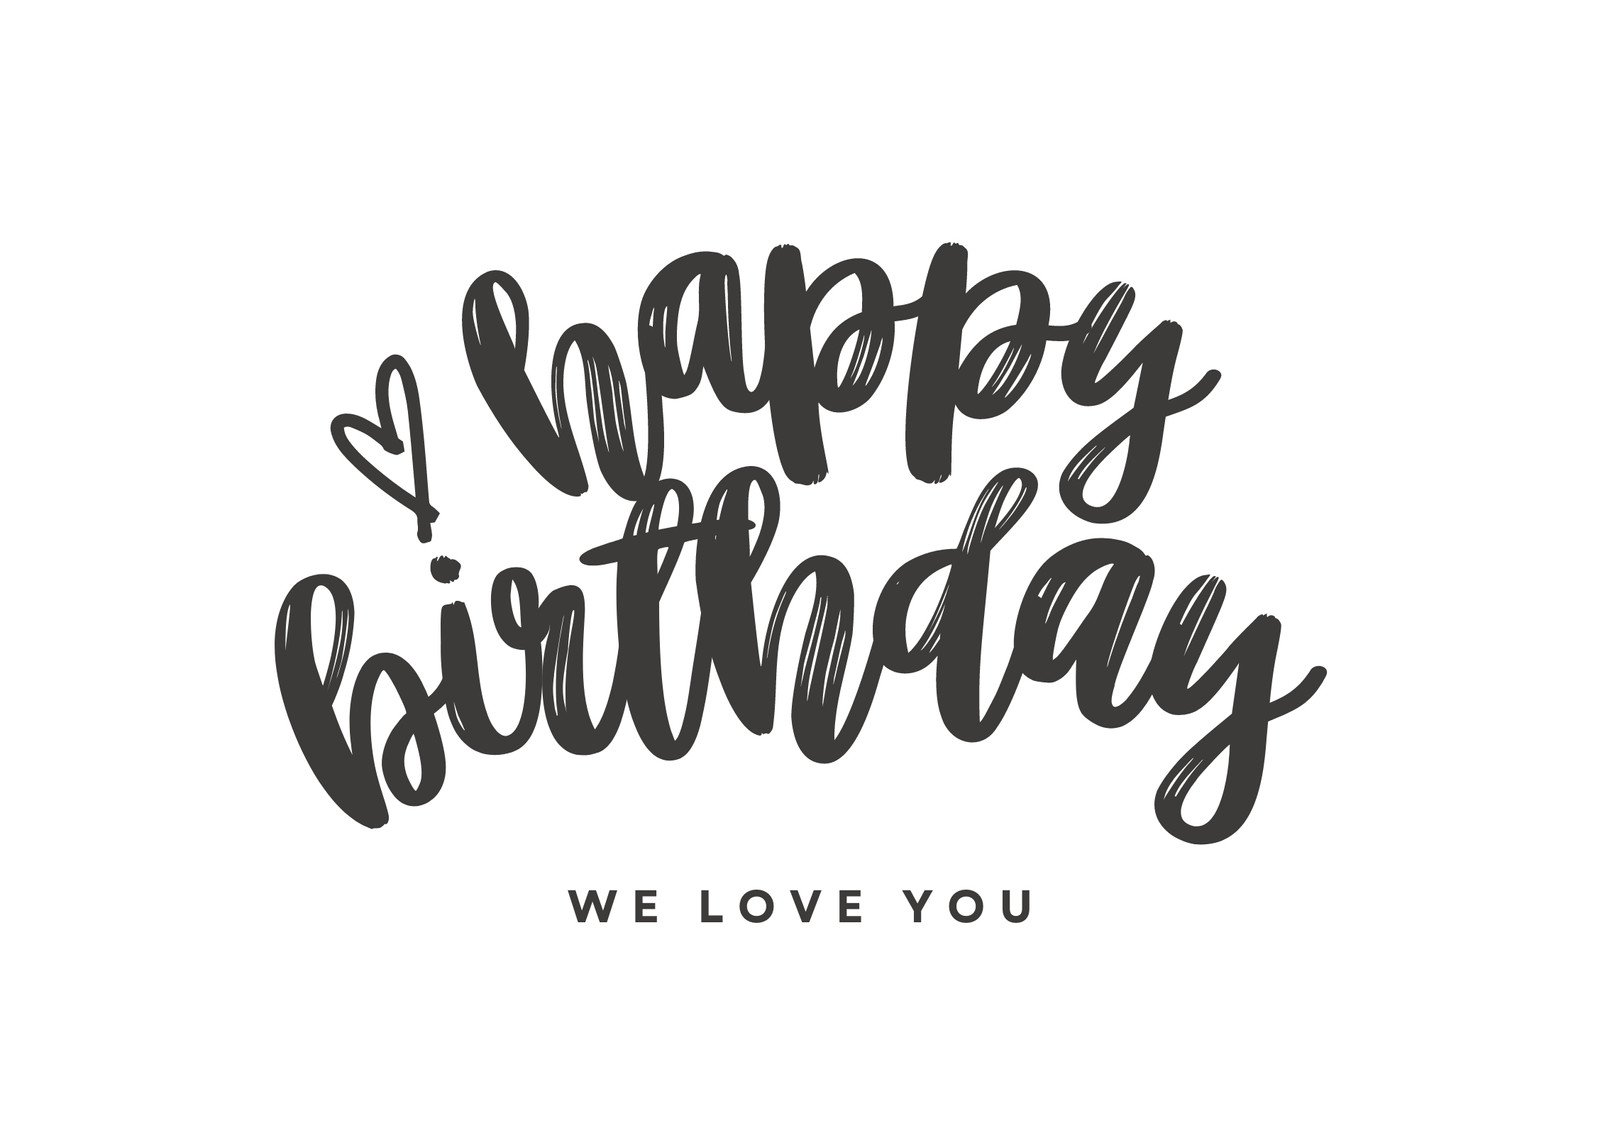 Birthday Cards & Messages Wish - Apps on Google Play